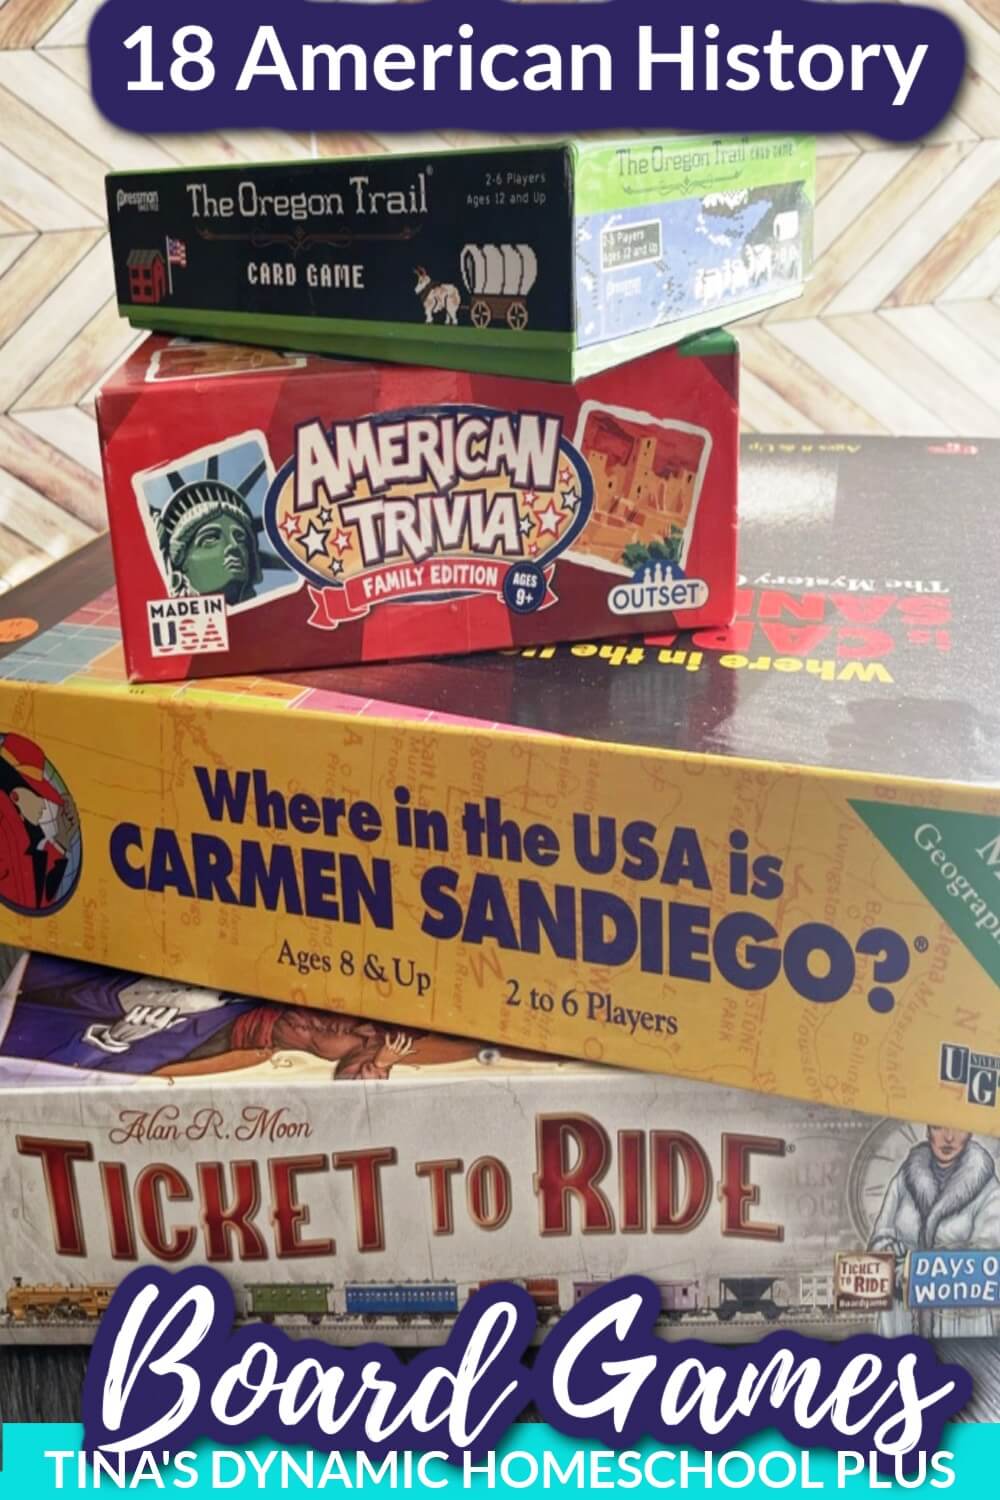 18 American History Board Games Which Brings History to Life